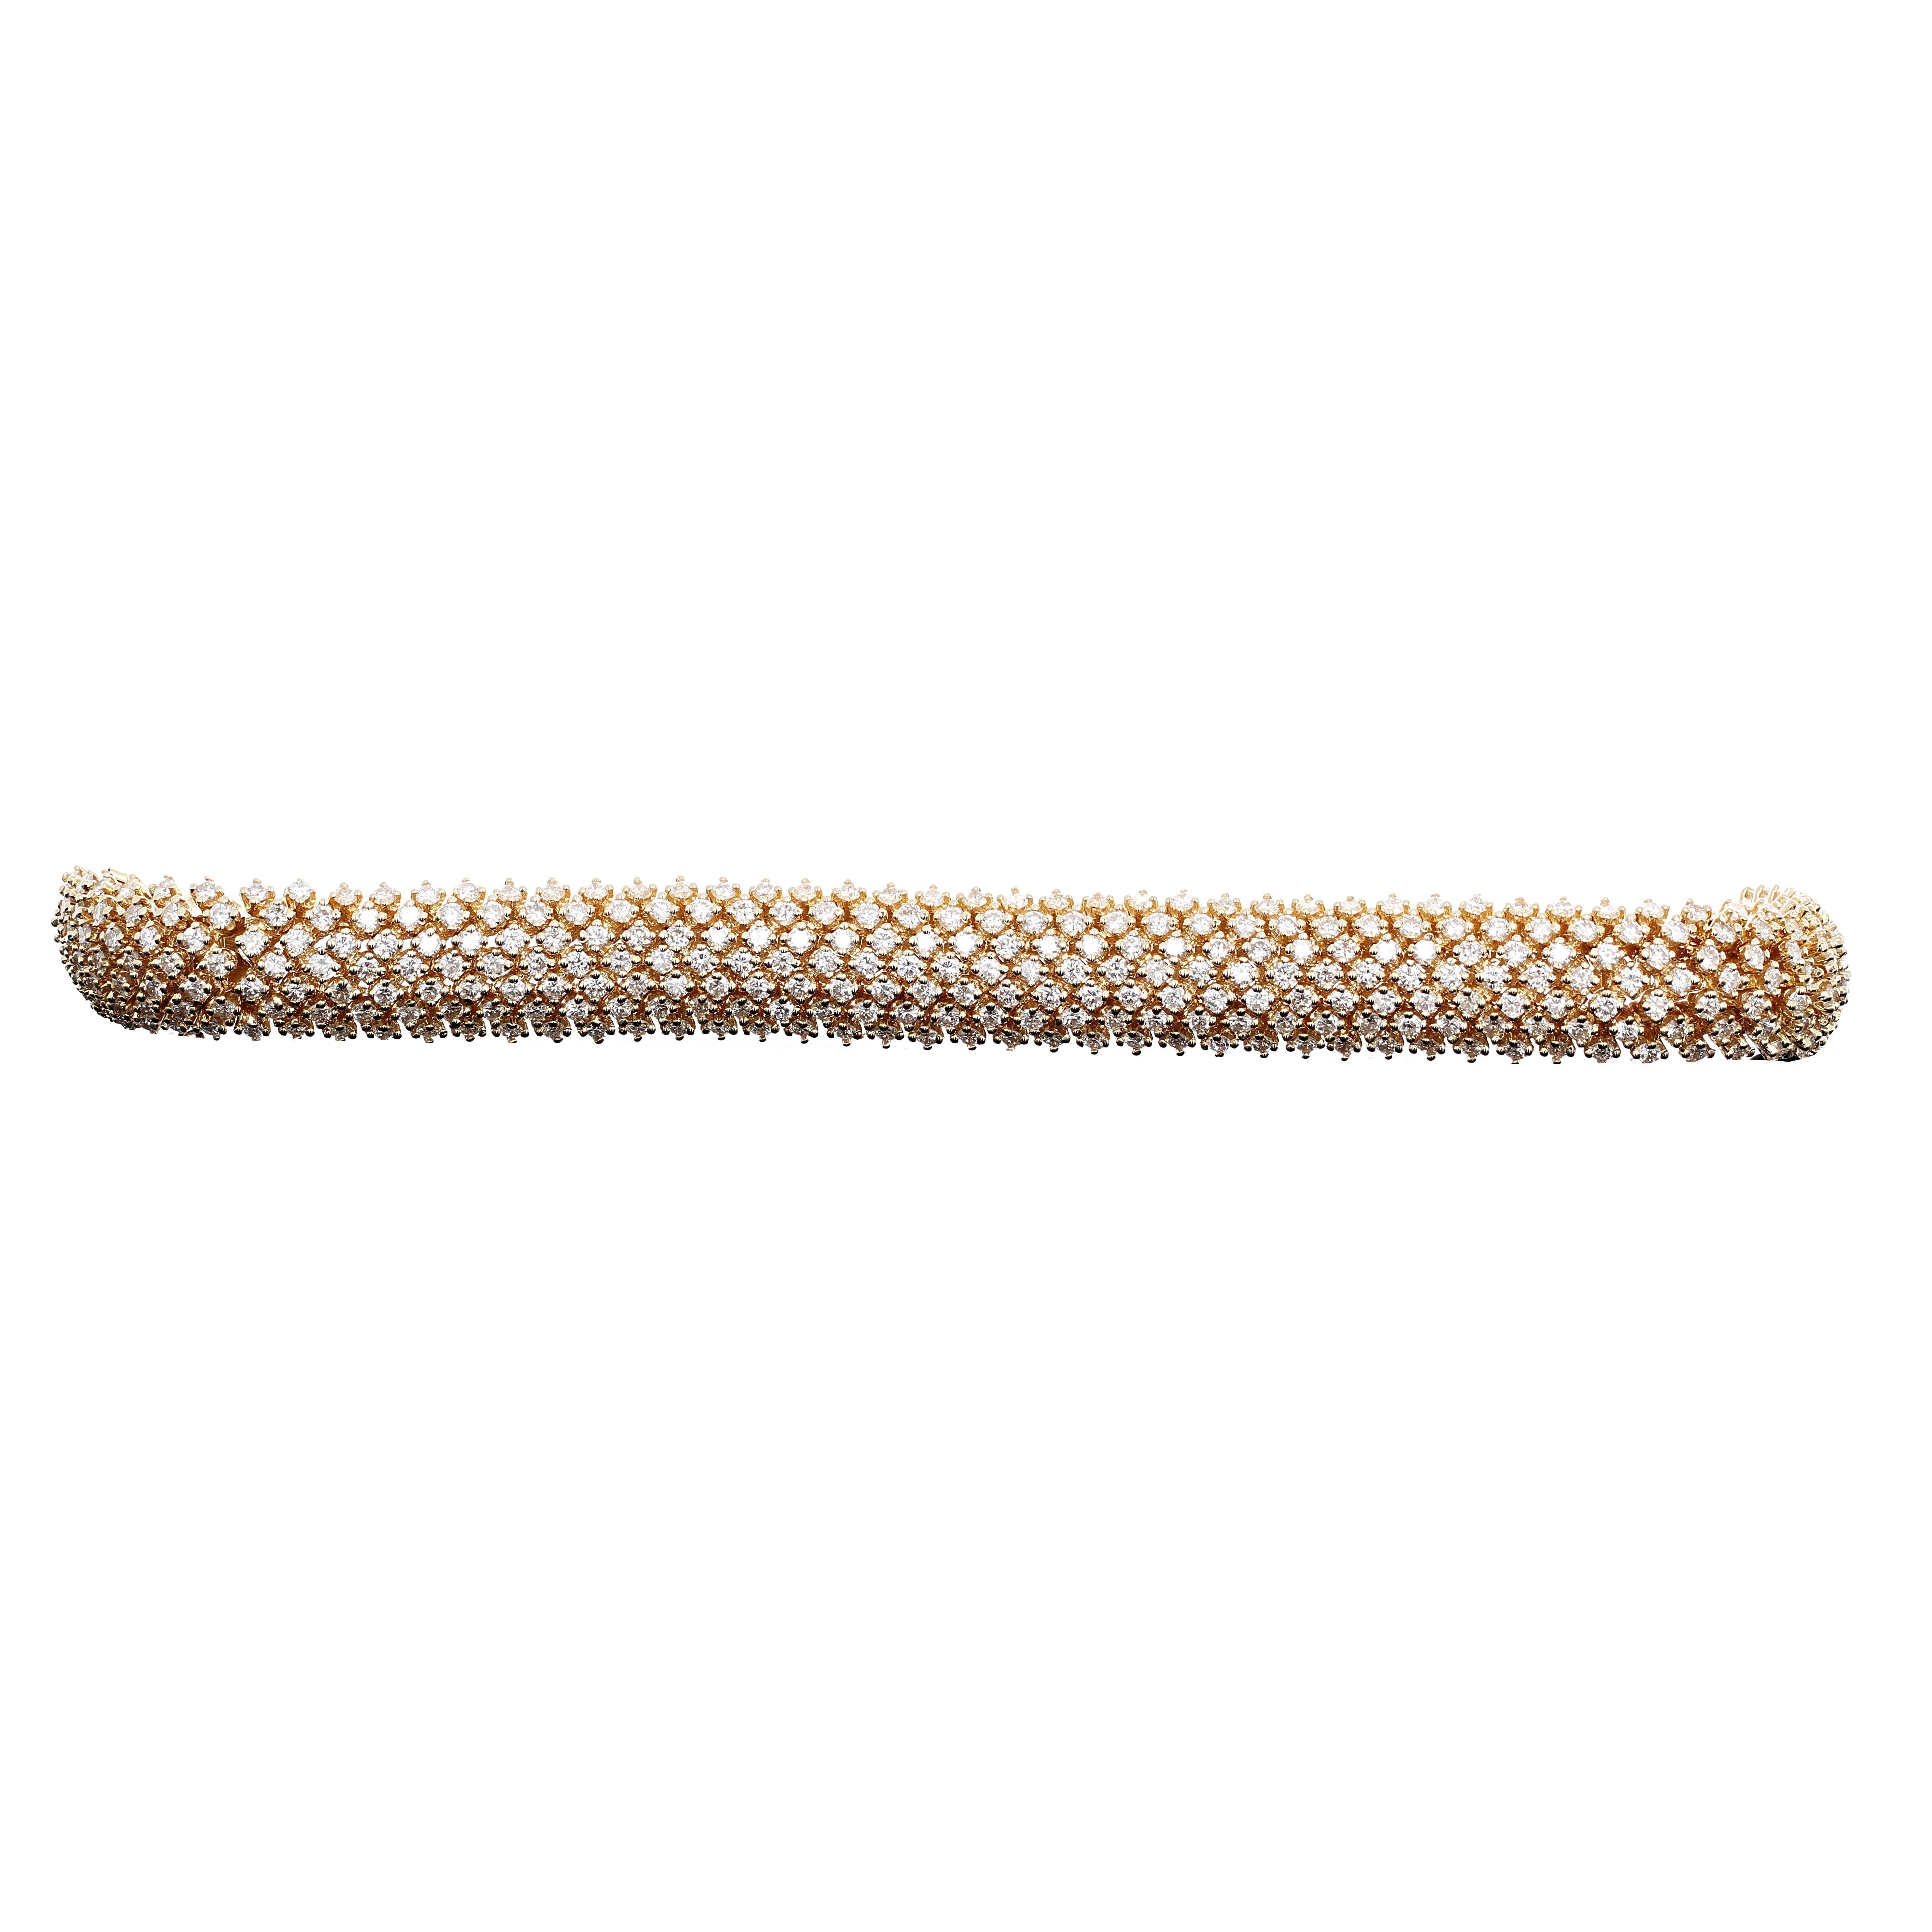 14 karat yellow gold diamond tennis bracelet. The bracelet has great movement and fits comfortably on your wrist. There are 7 rows of round brilliant white diamonds with an estimated diamond carat weight of 14.20 carats.

The bracelet measures 7.25